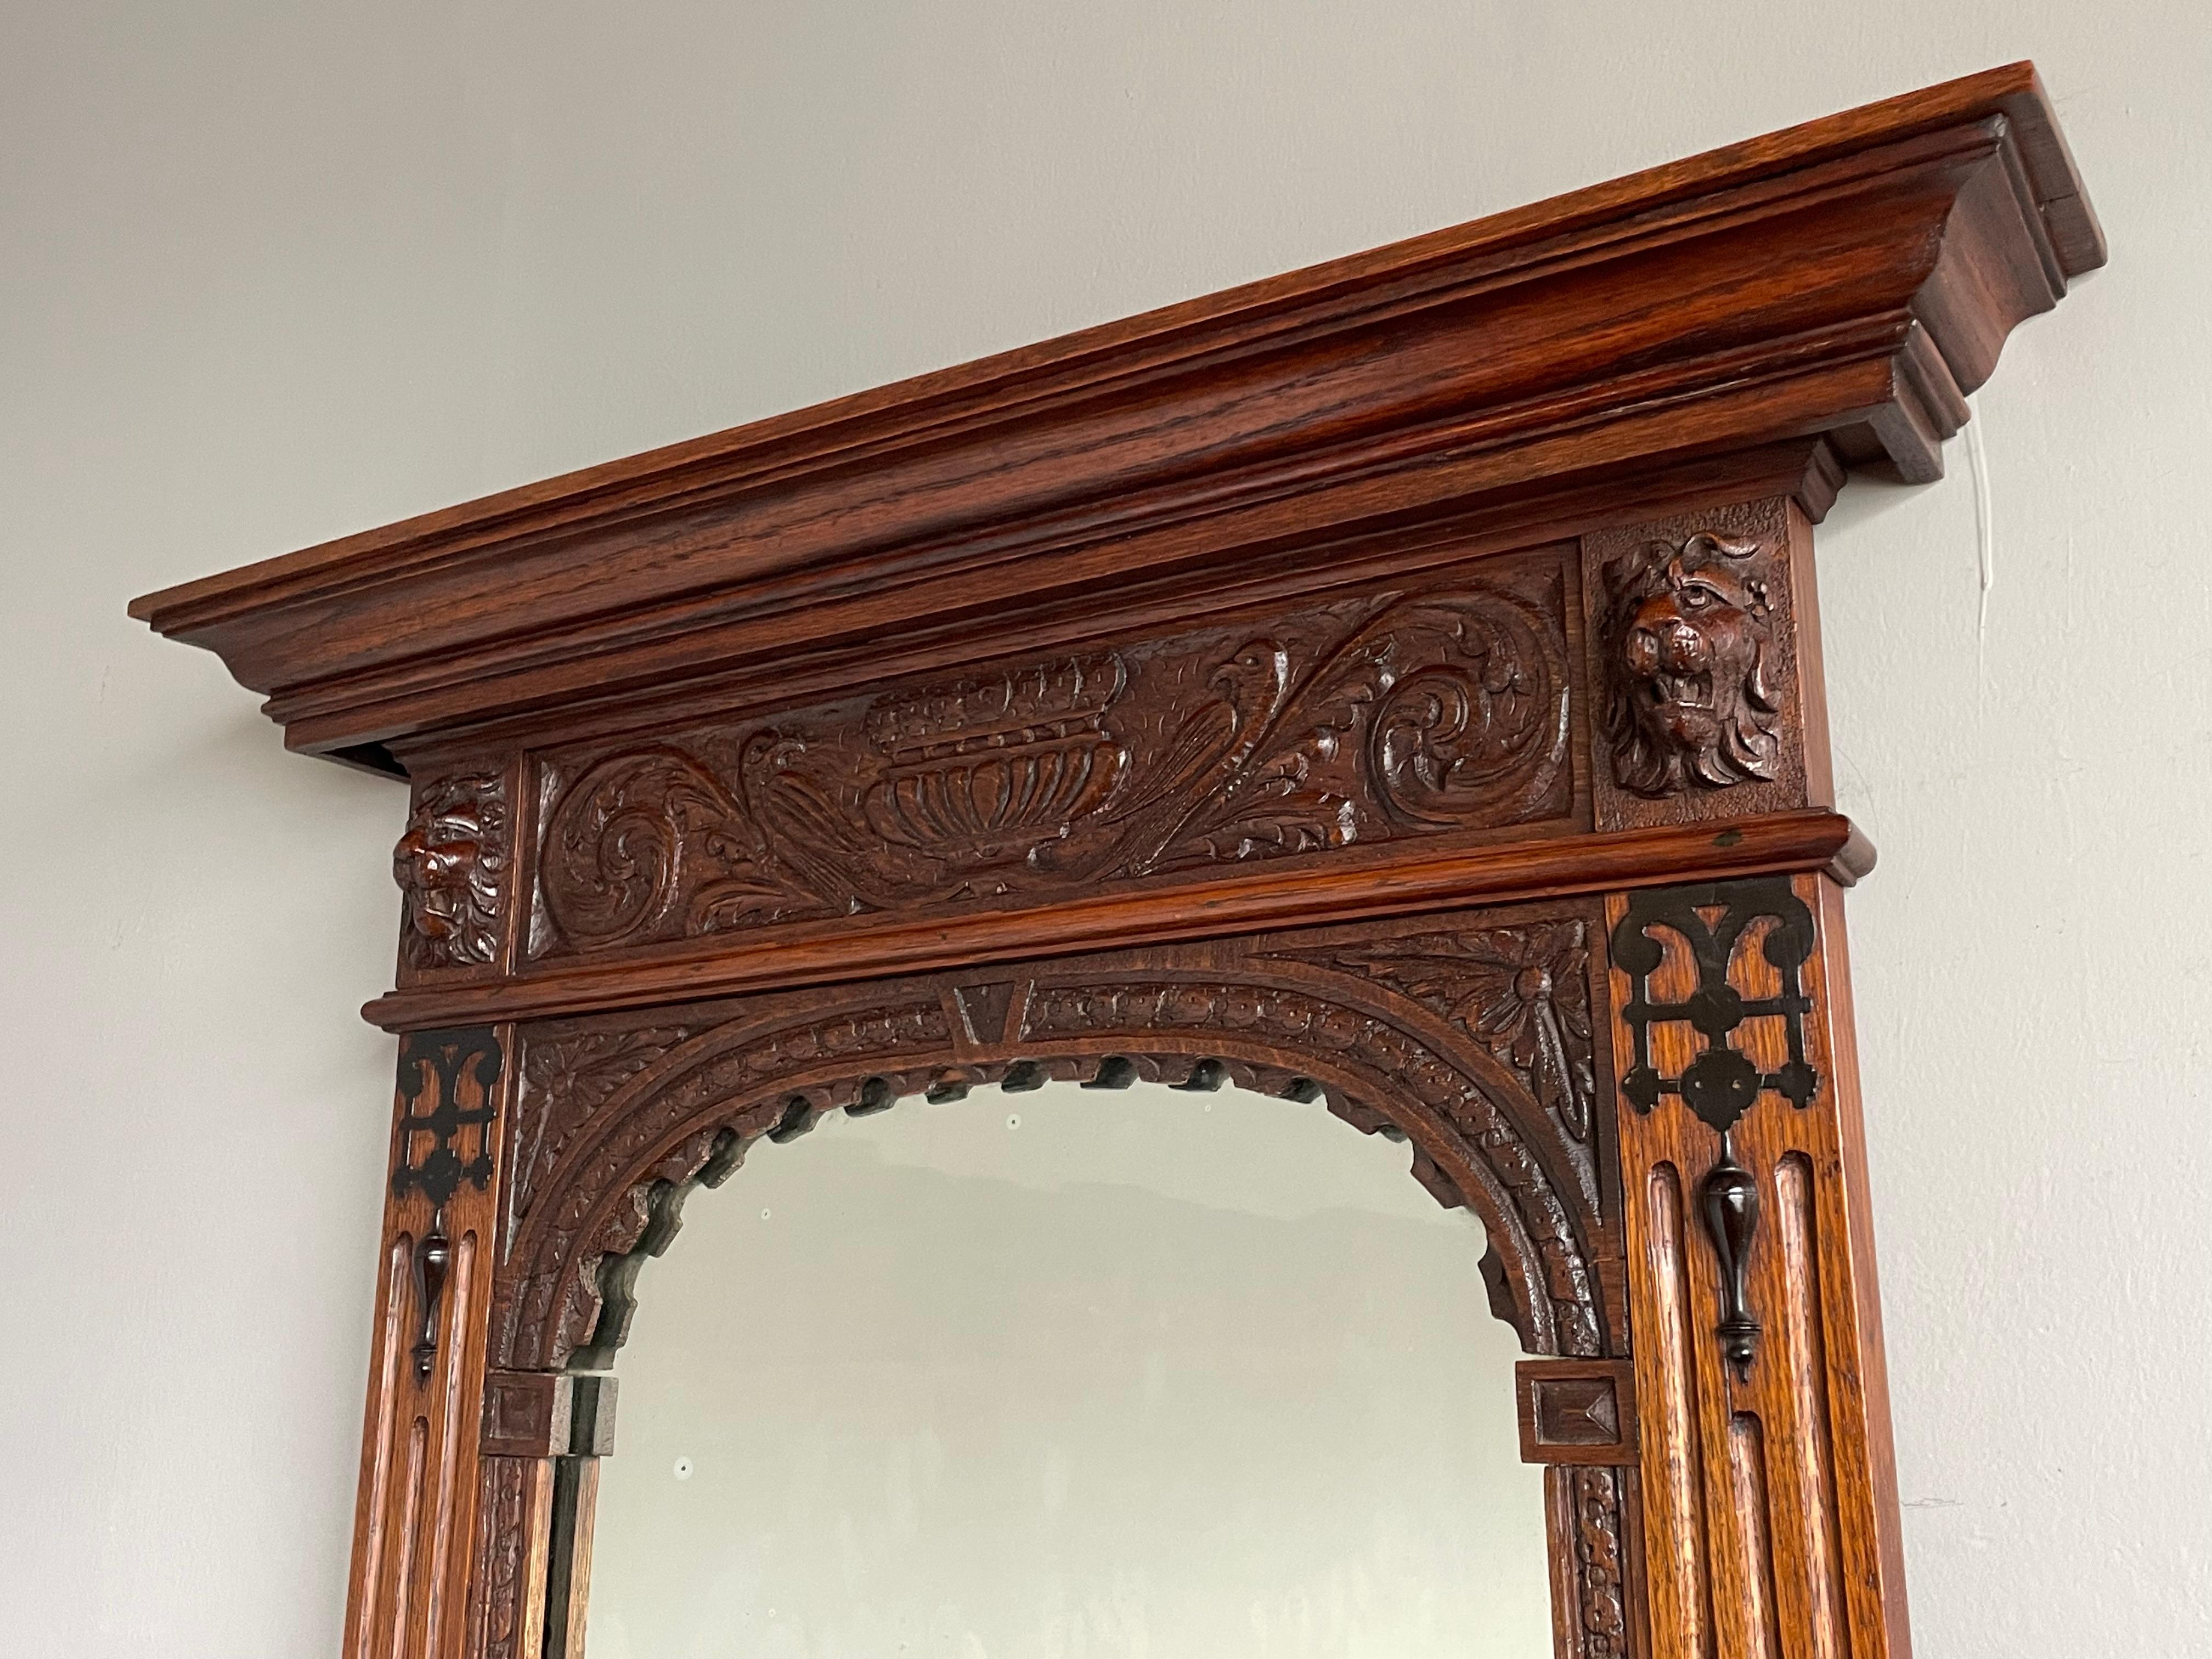 Exceptional antique hallway mirror with hand carved lions sculptures.

This stunning, Dutch Renaissance Revival entry hall mirror is a marvelous antique to come home to, but it also helps you to look your finest just before leaving. The very well